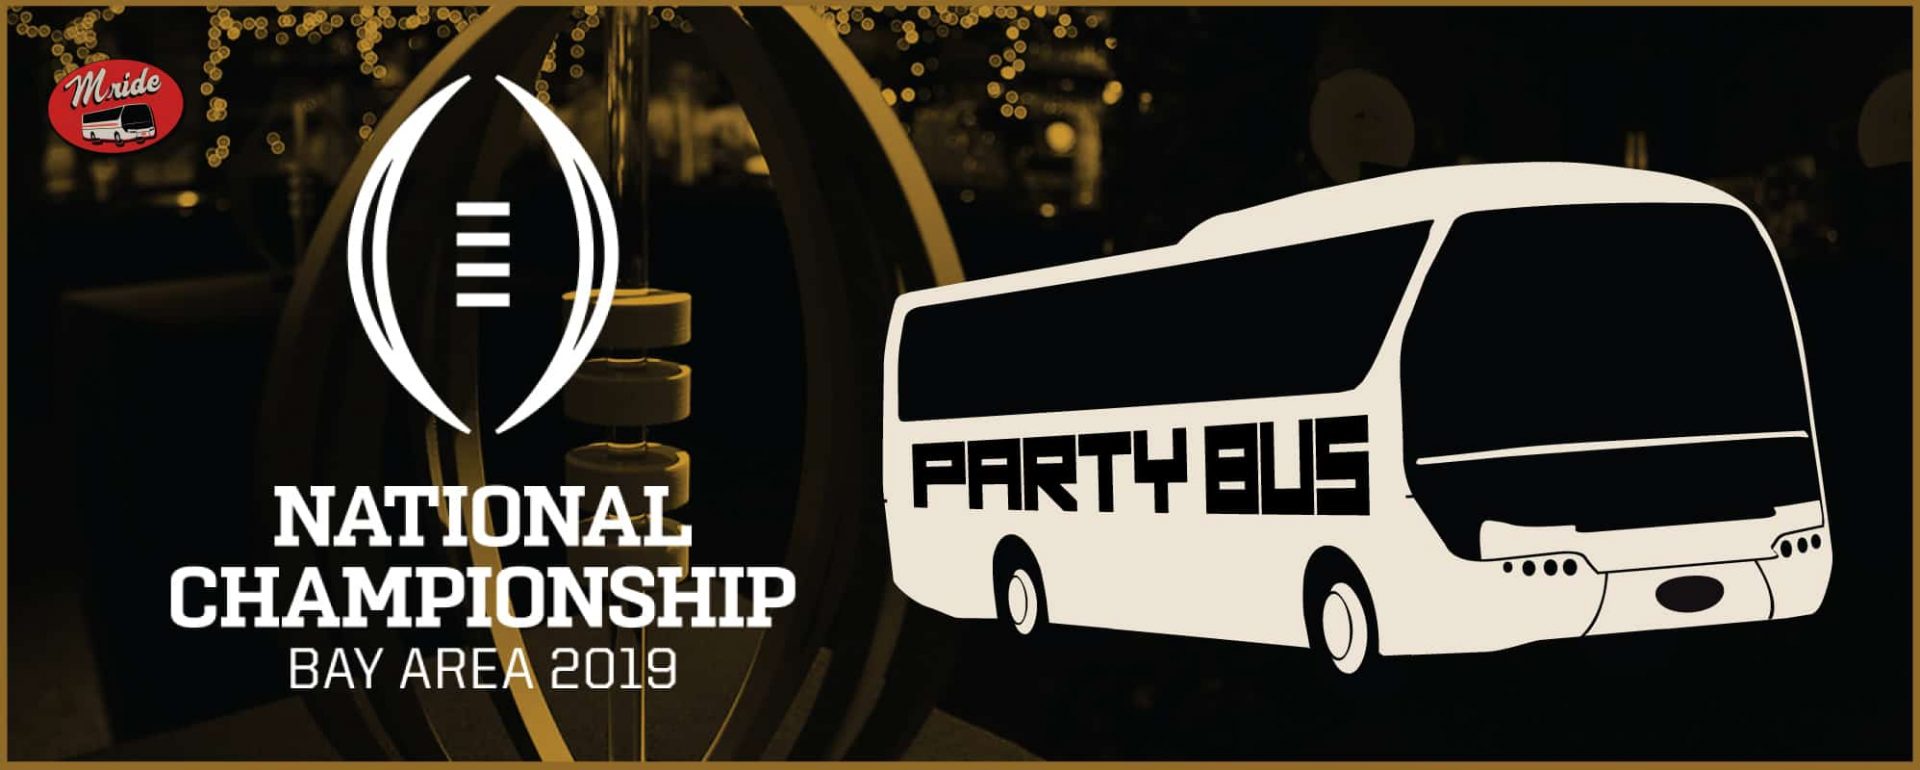 College Football Playoff National Championship Shuttle Bus